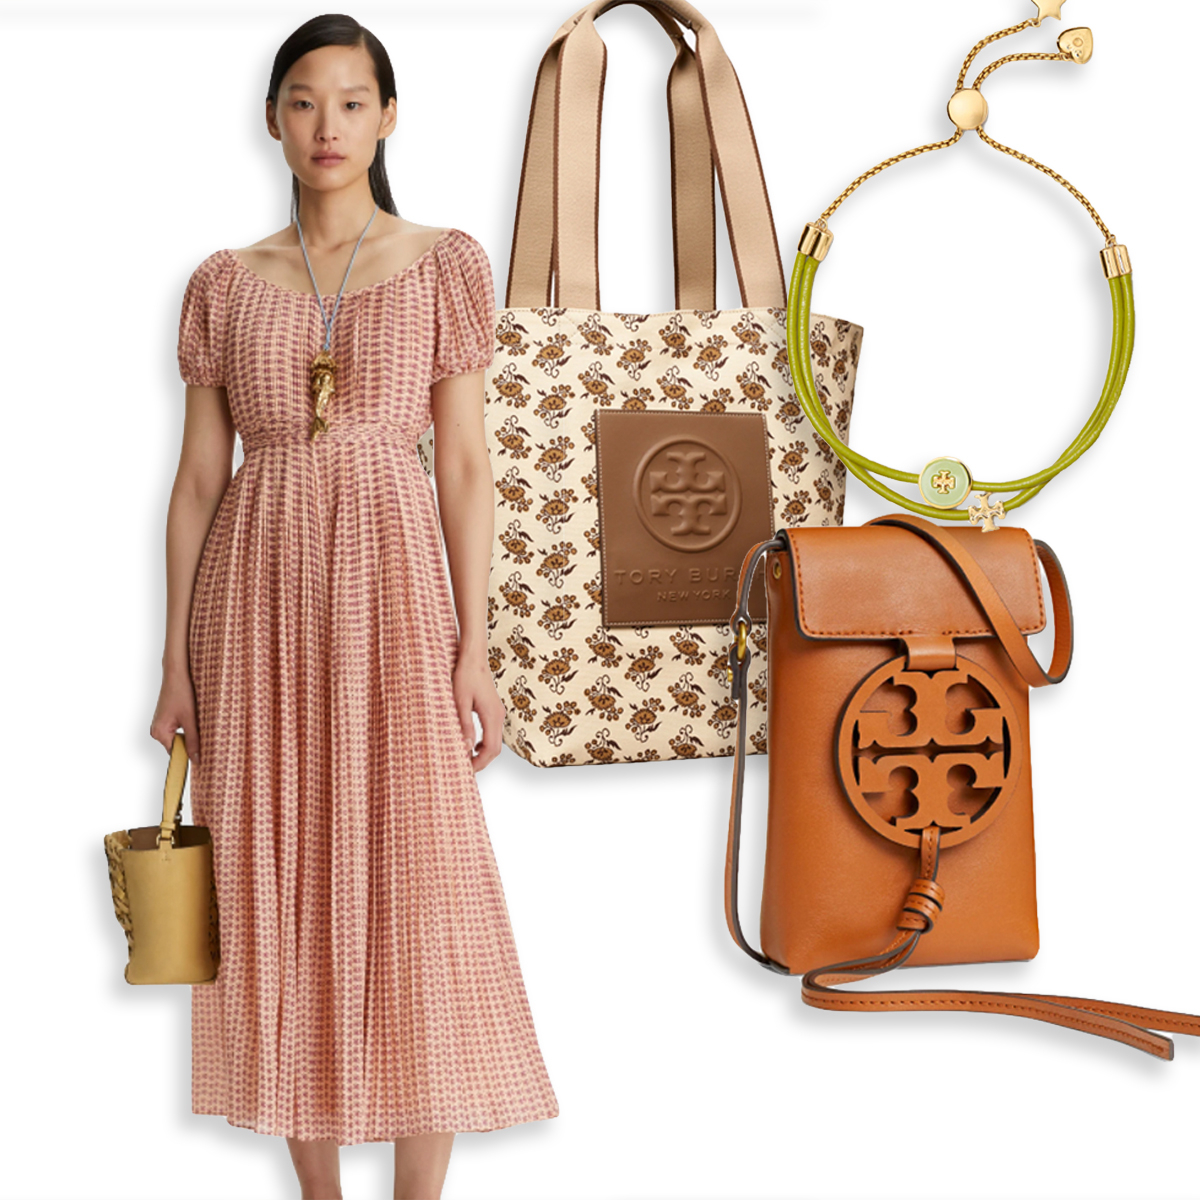 Tory Burch Sale 2023: Save Up to 60% Off Shoes, Sandals, Totes